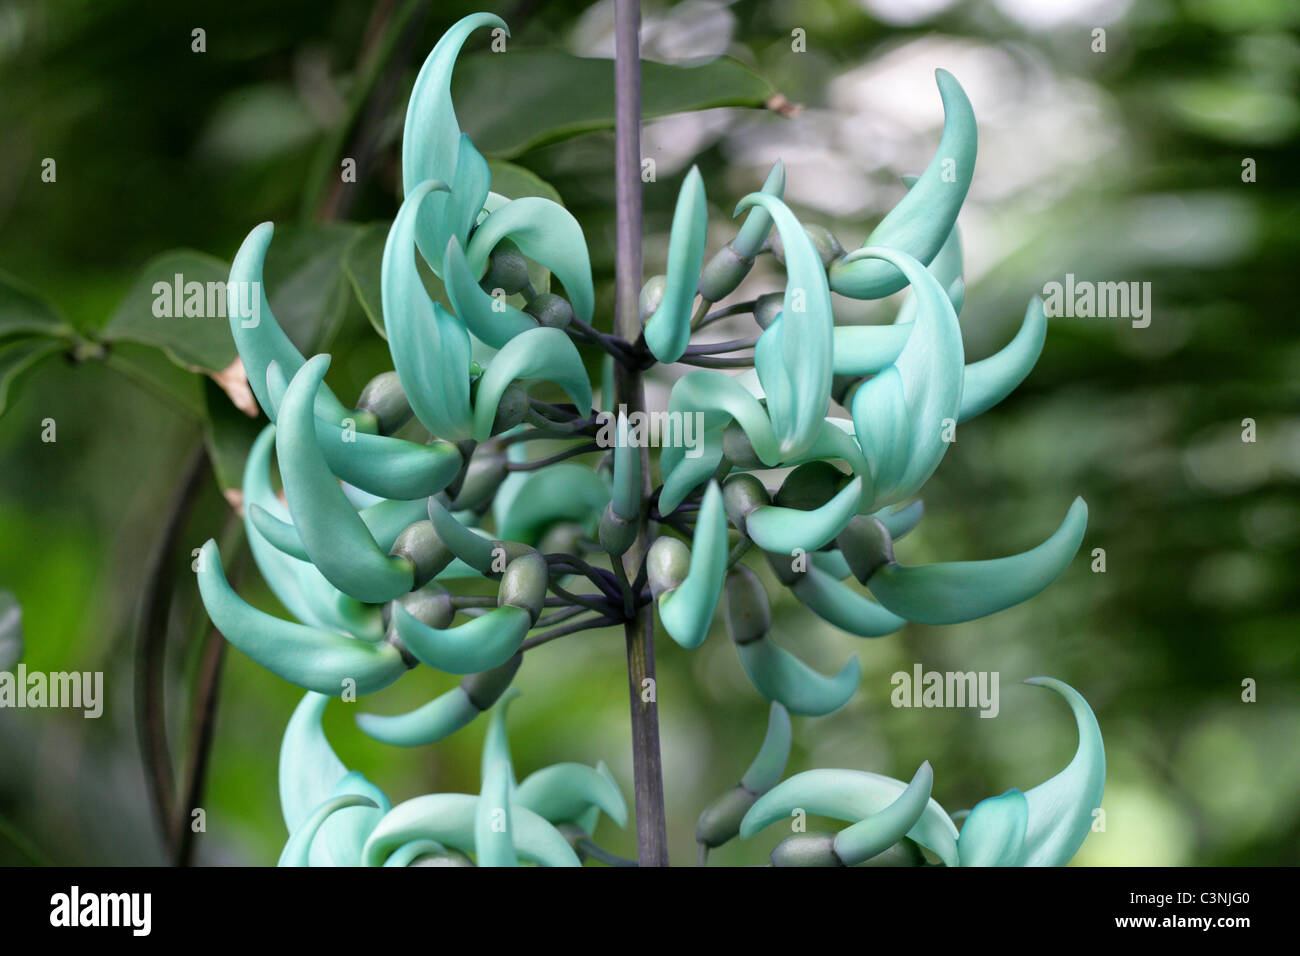 The Jade Vine, Strongylodon macrobotrys, Fabaceae, Philippines, South East Asia. Stock Photo